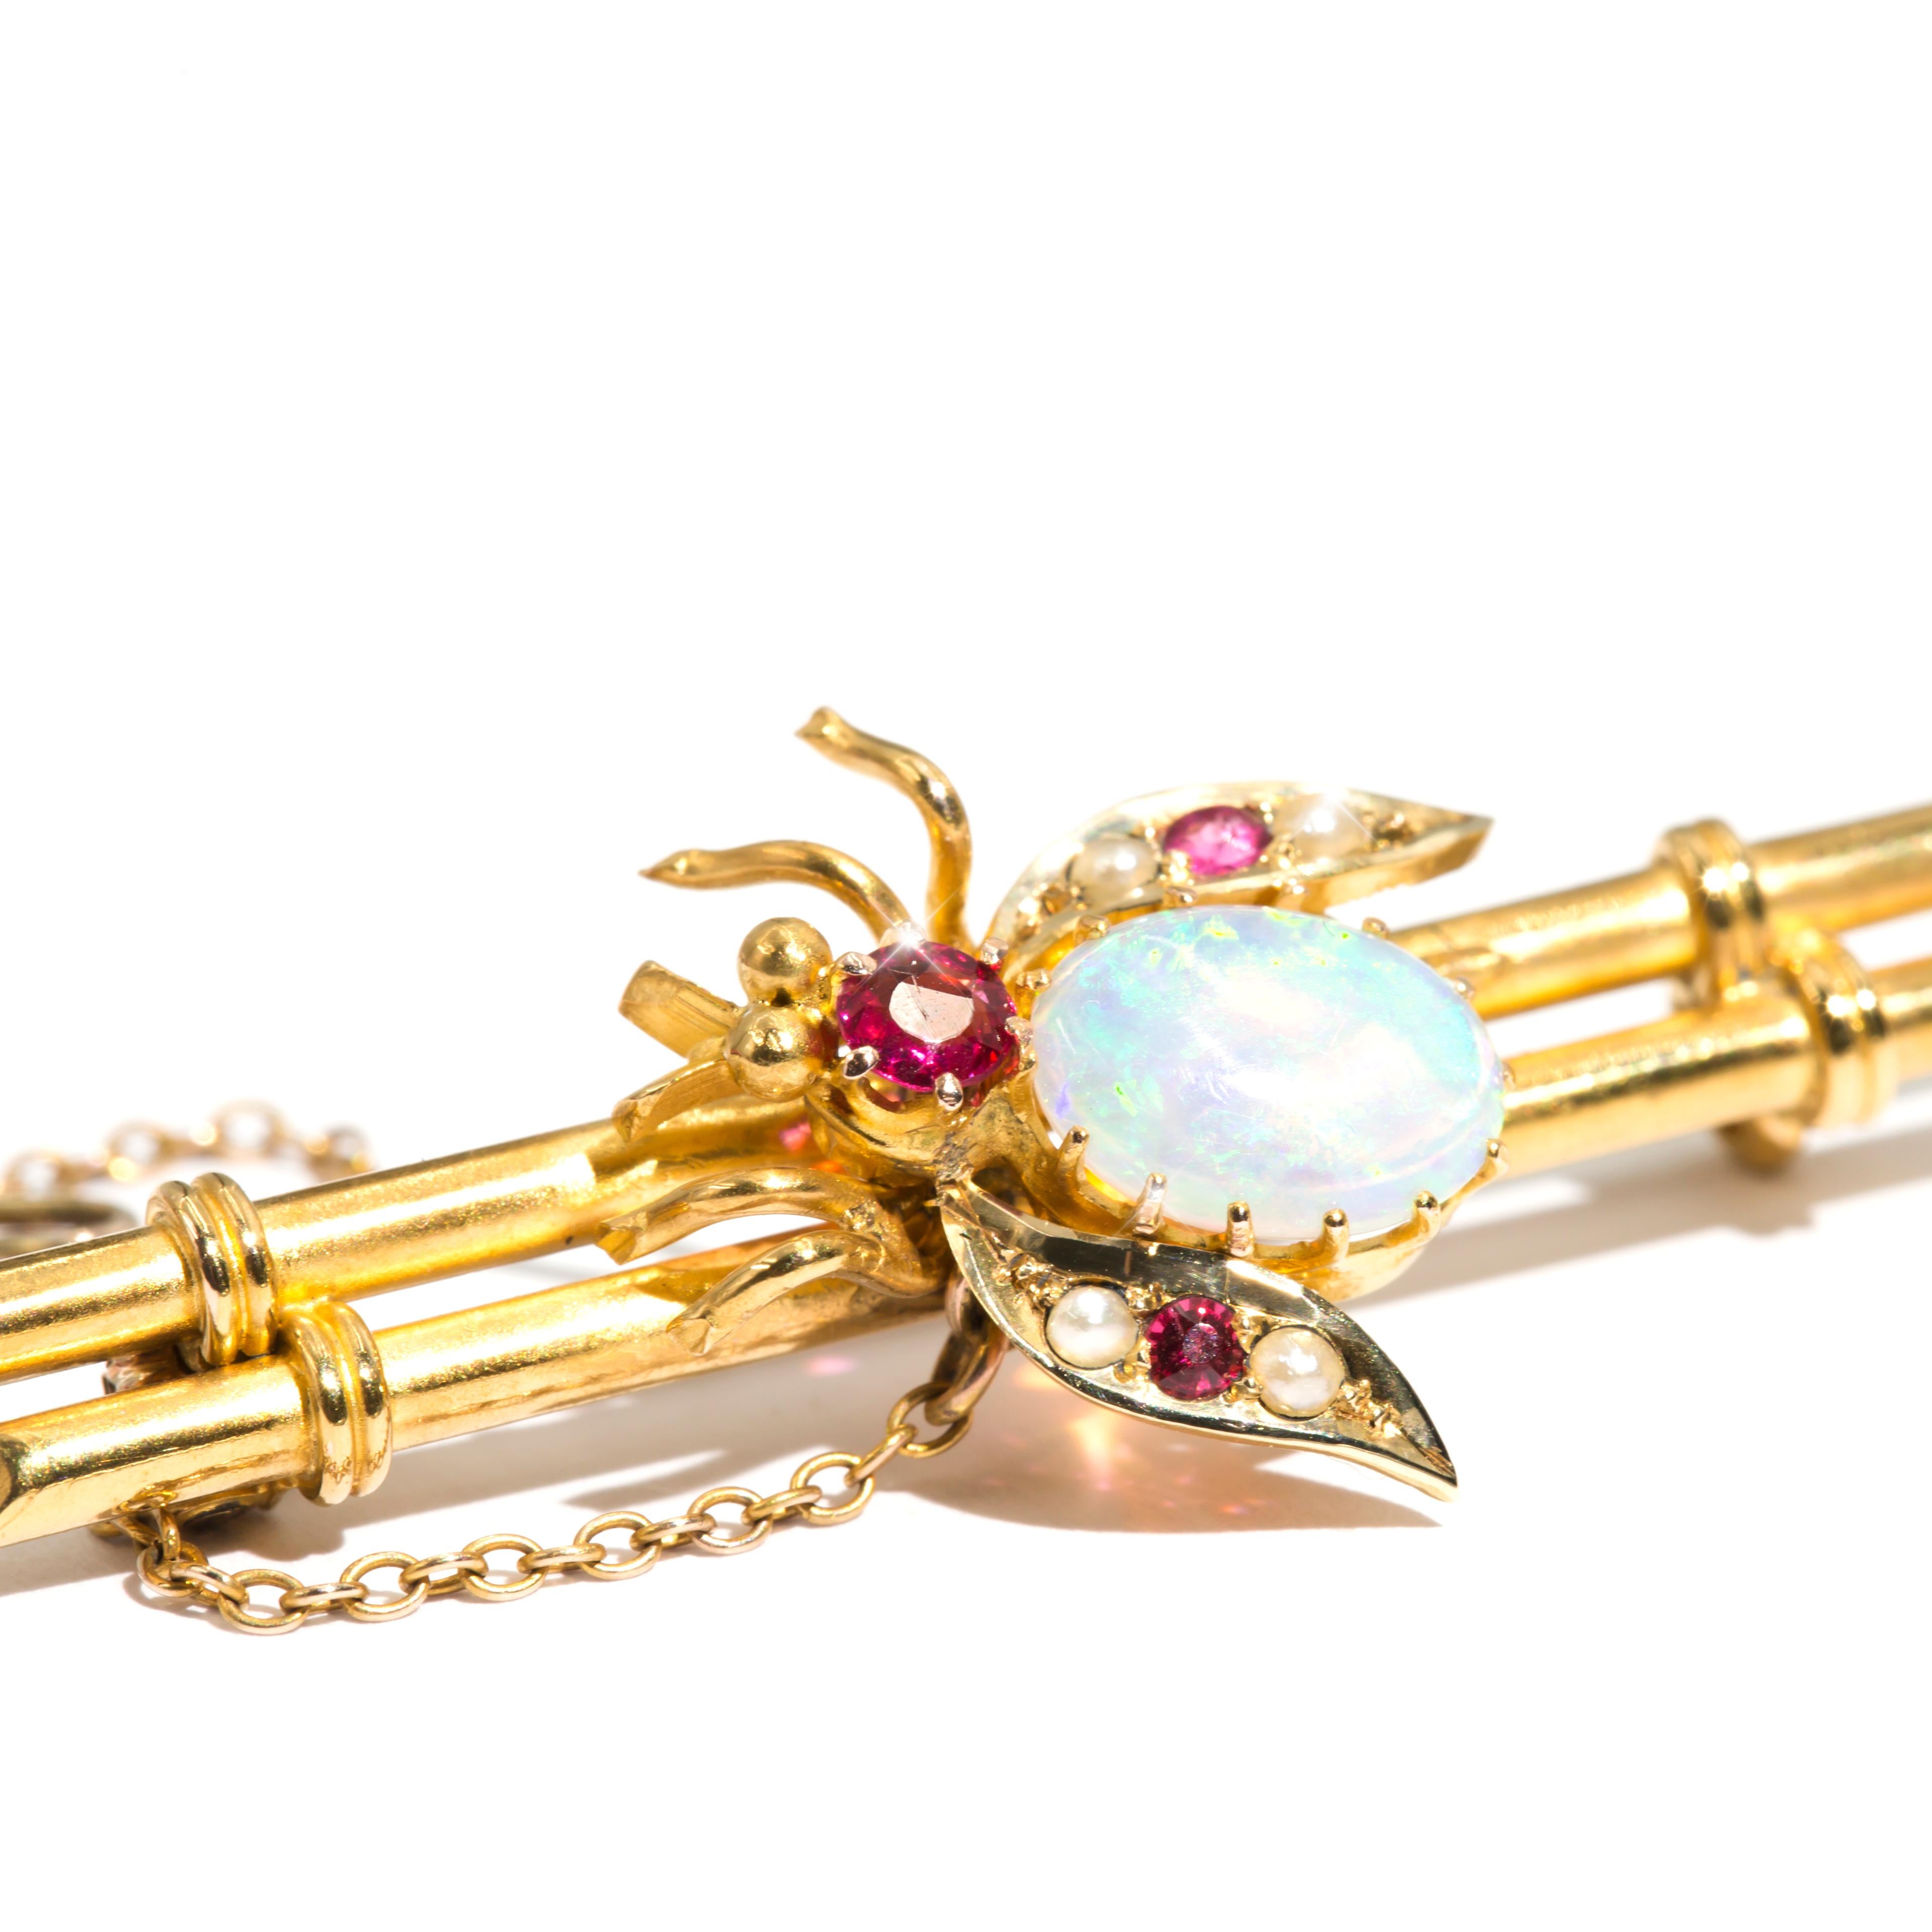 Carefully crafted in 15 carat gold is this gorgeous antique Edwardian brooch, Circa 1910, features a central bee with a solid oval crystal opal forming the body, and round pinkish-red garnet topped doublets with tiny little seed pearls in the wings.